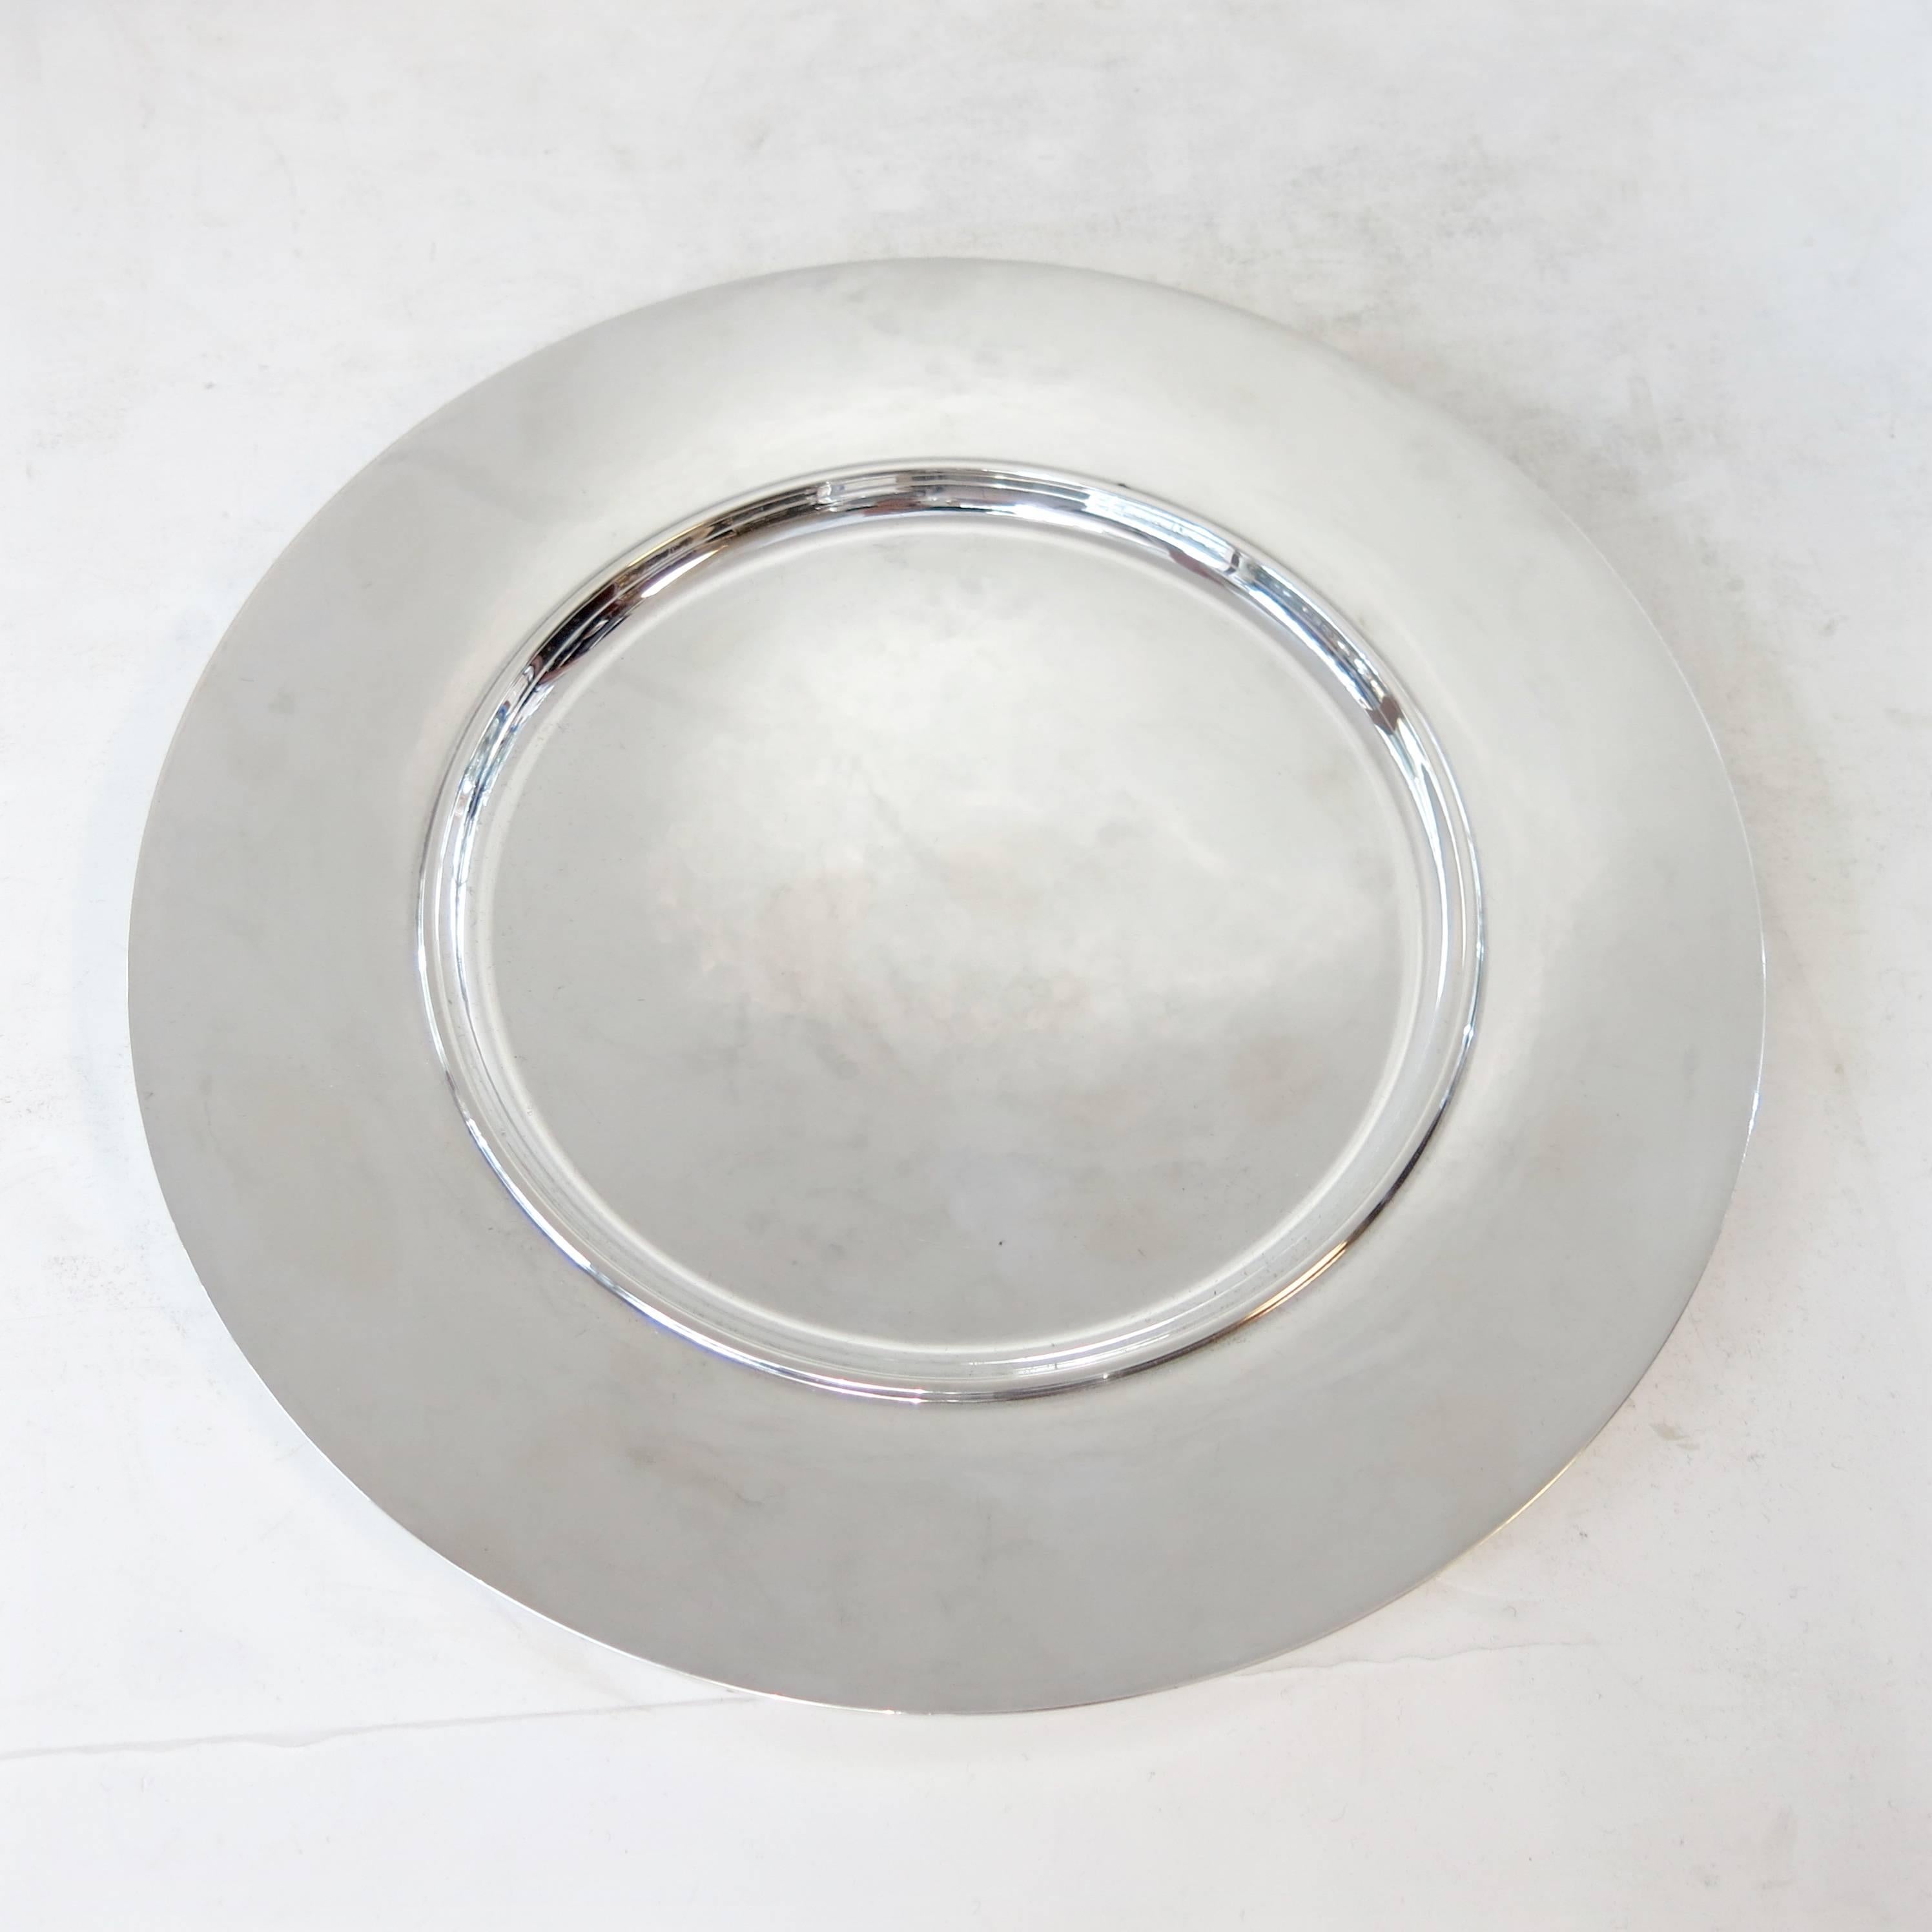 Georg Jensen complete set of 12 service plates no. 587C by Johan Rohde.
Each with a beautiful hand-hammered surface.
Measure: 11" diameter. Total weight for the 12 is 7,875 grams.
All are marked 587C, with various date marks.